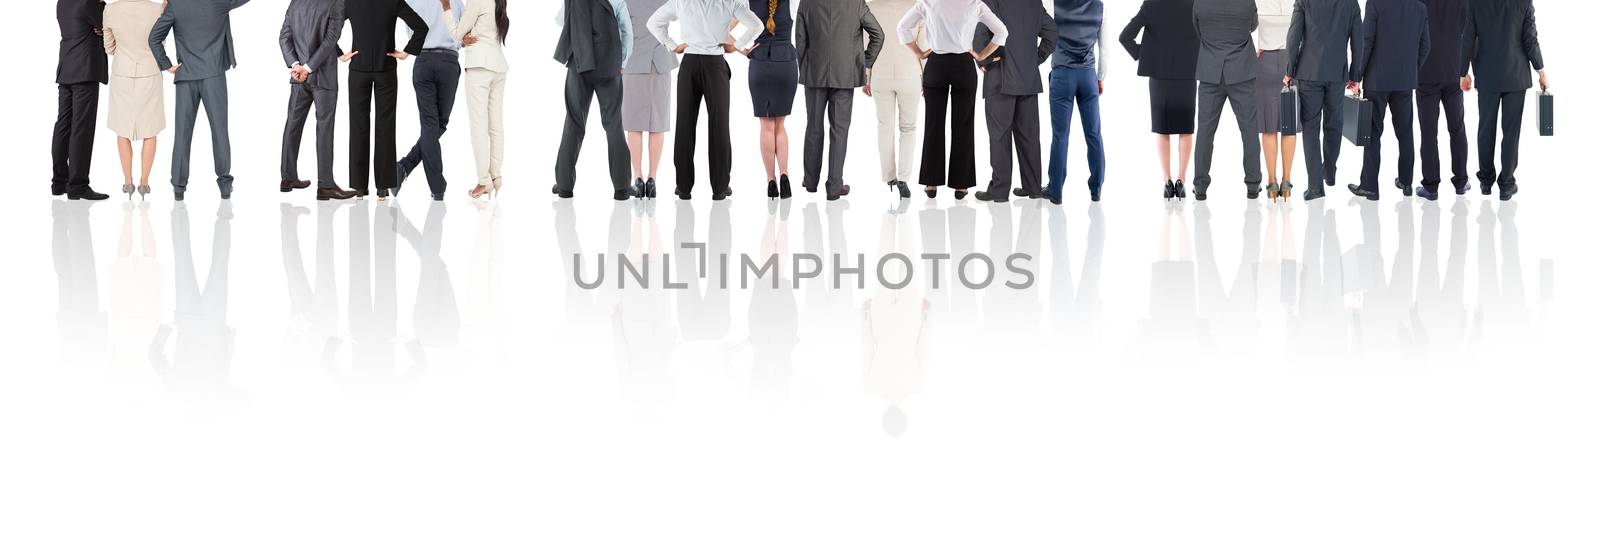 Digital composite of Group of Business People standing